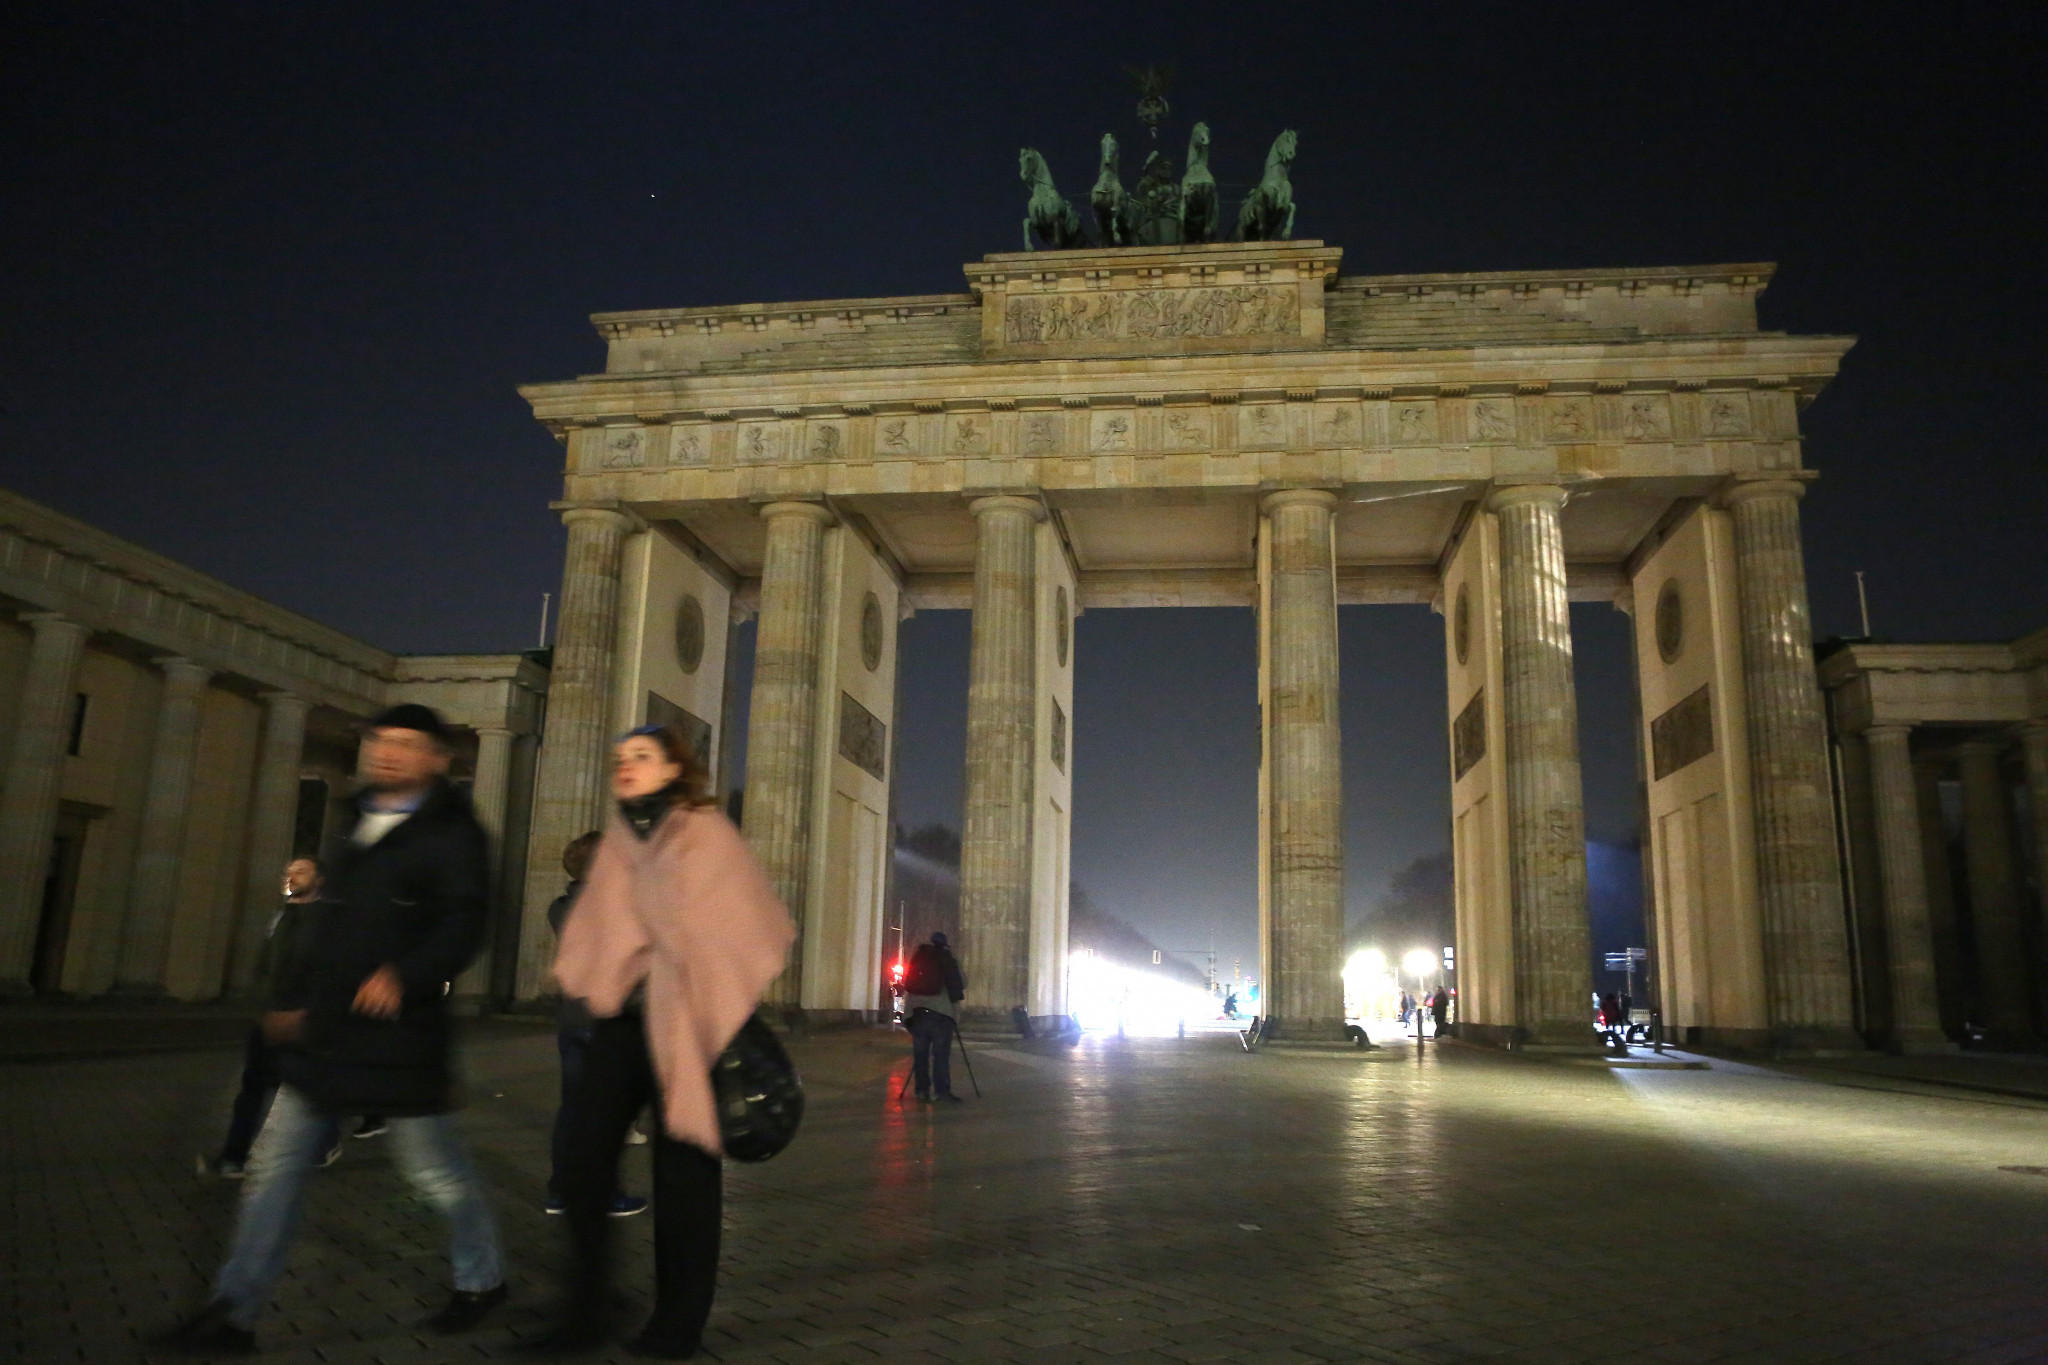 Berlin's iconic Brandenburg Gate will feature heavily on the marathon course ©Getty Images